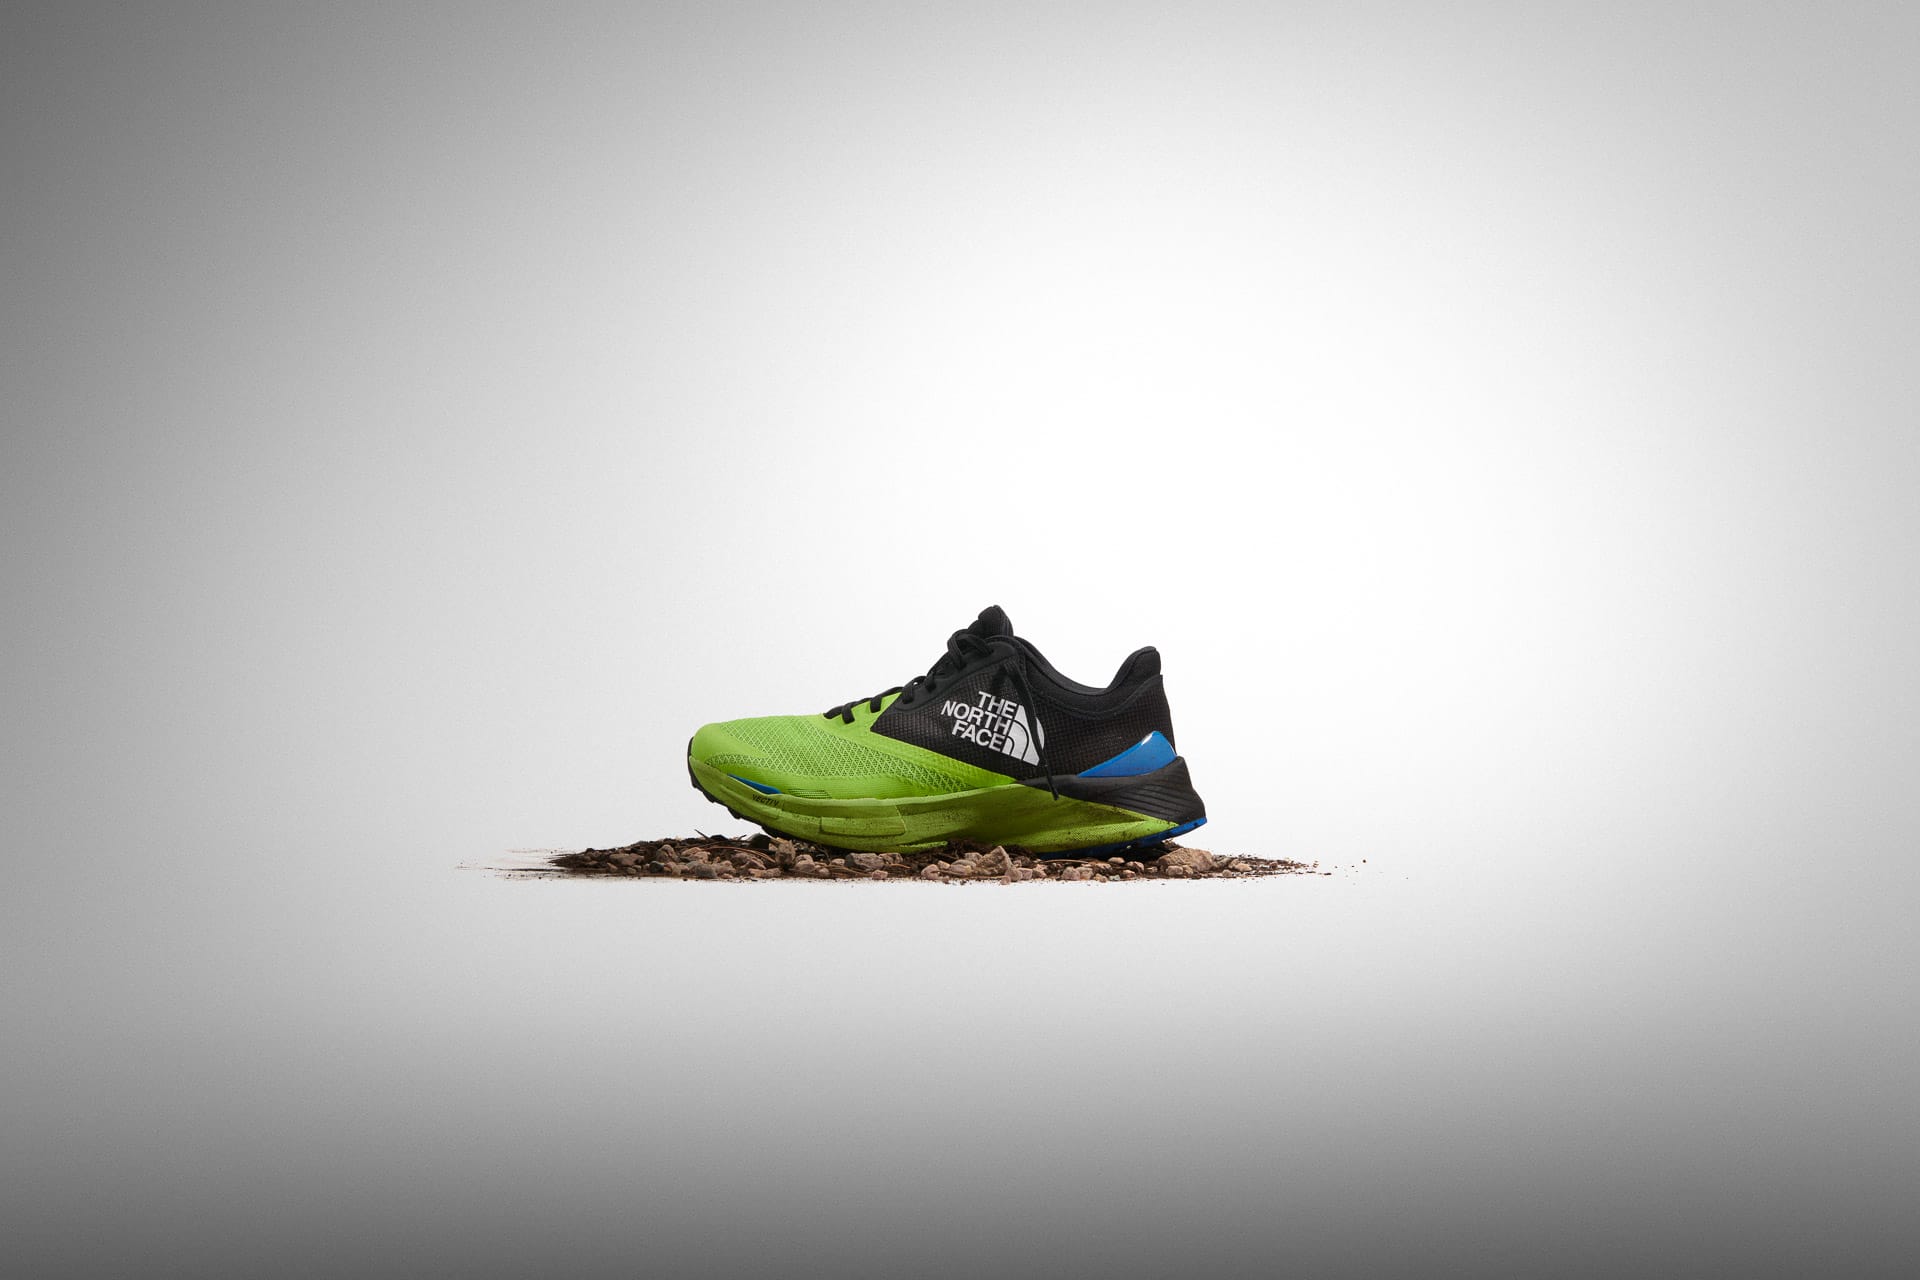 the north face vectiv 2 trail shoe, first look, running shots from The North Face, Enduris